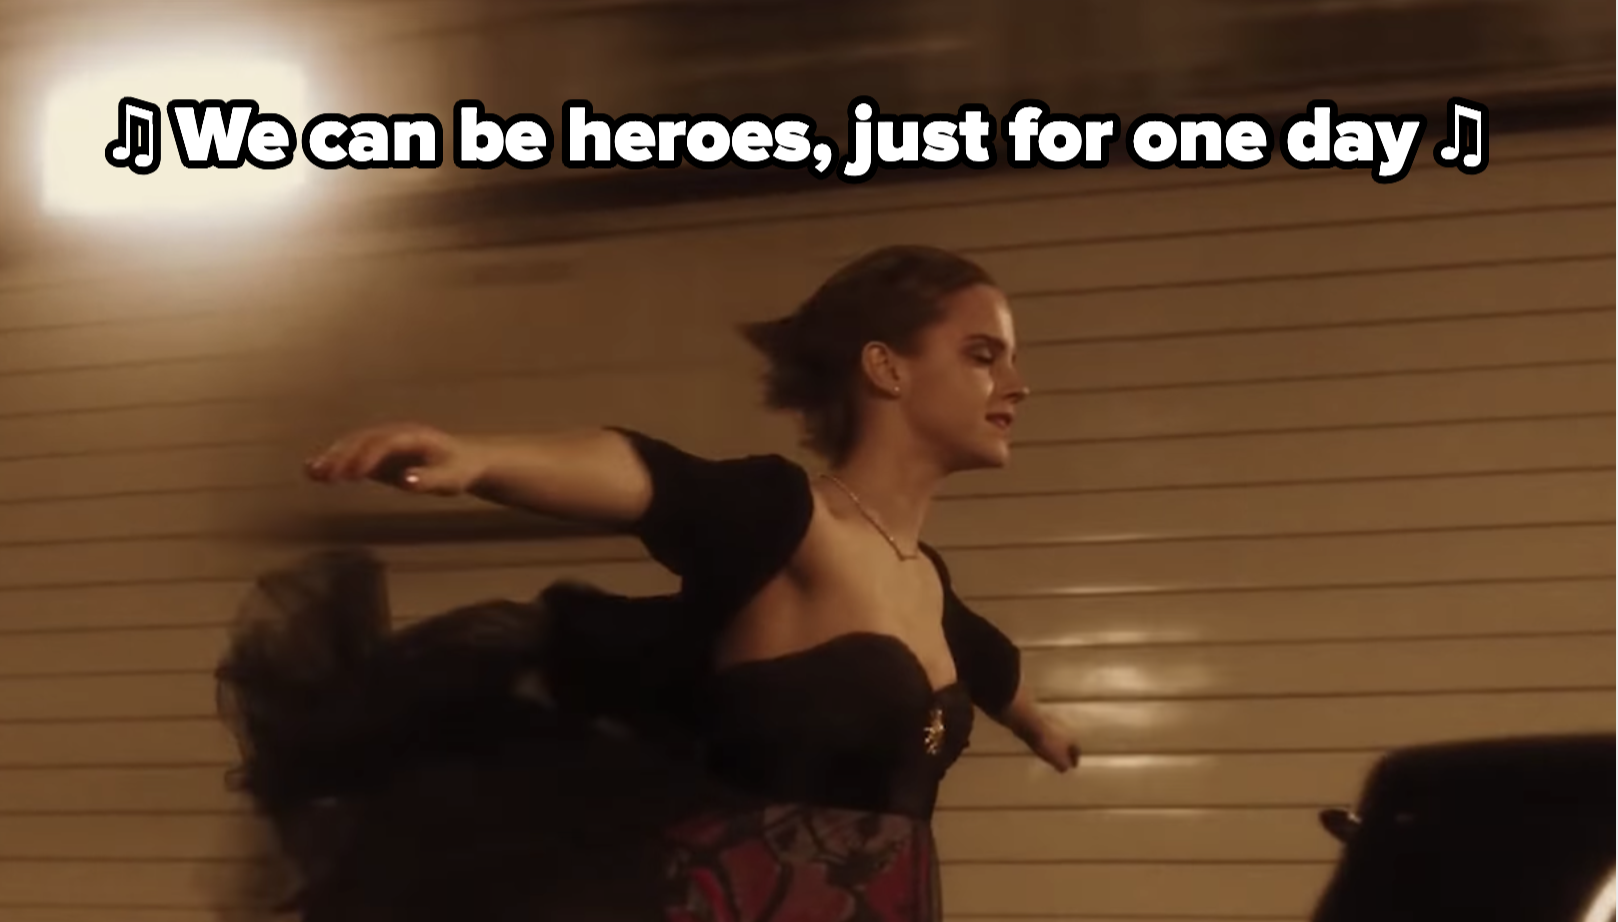 Emma Watson spreads her arms in the tunnel while Heroes plays